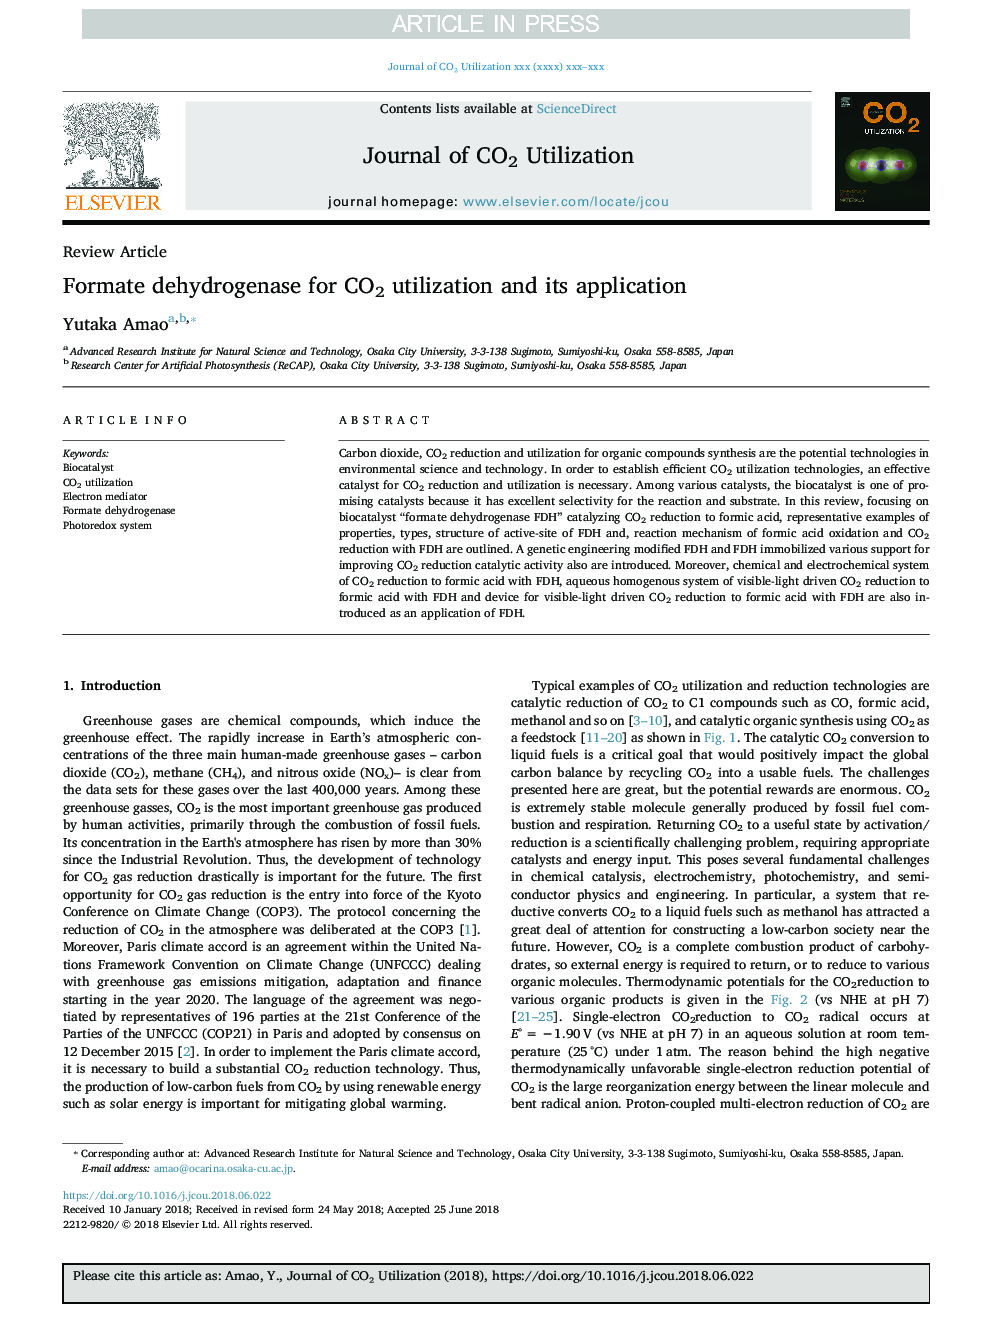 Formate dehydrogenase for CO2 utilization and its application